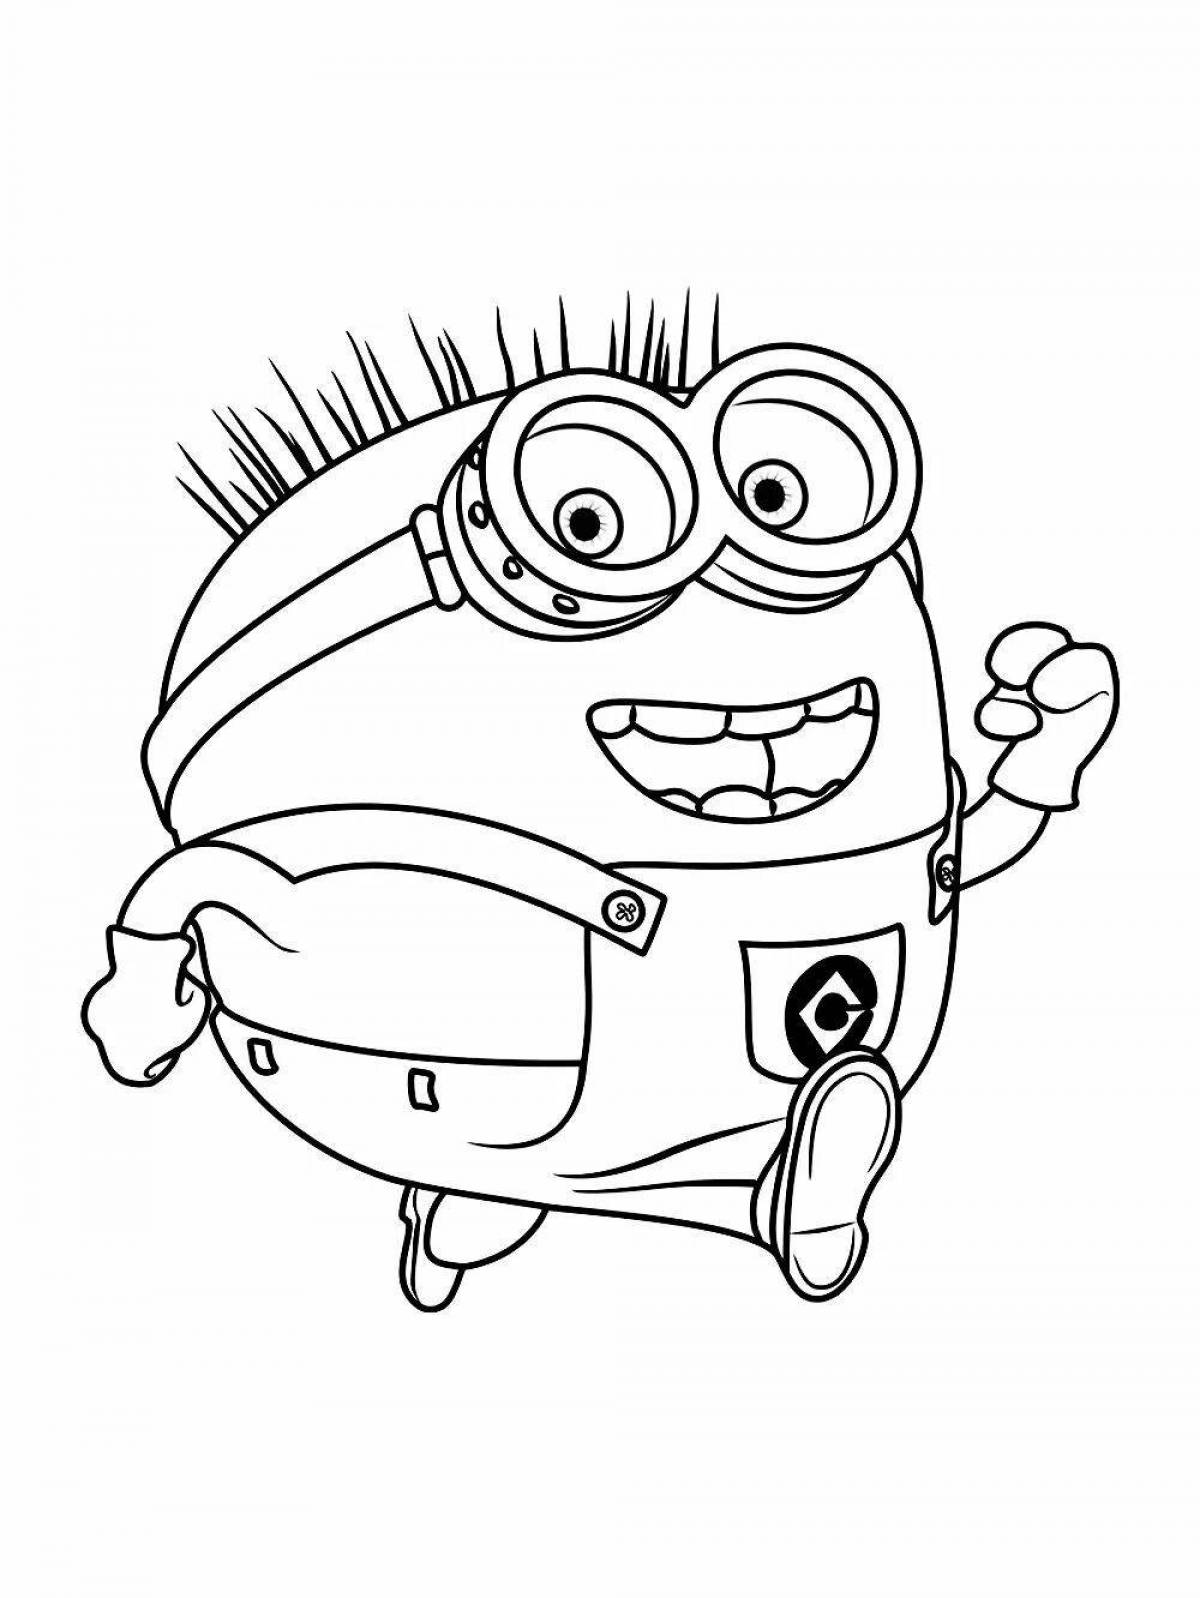 Adorable minions coloring book for girls